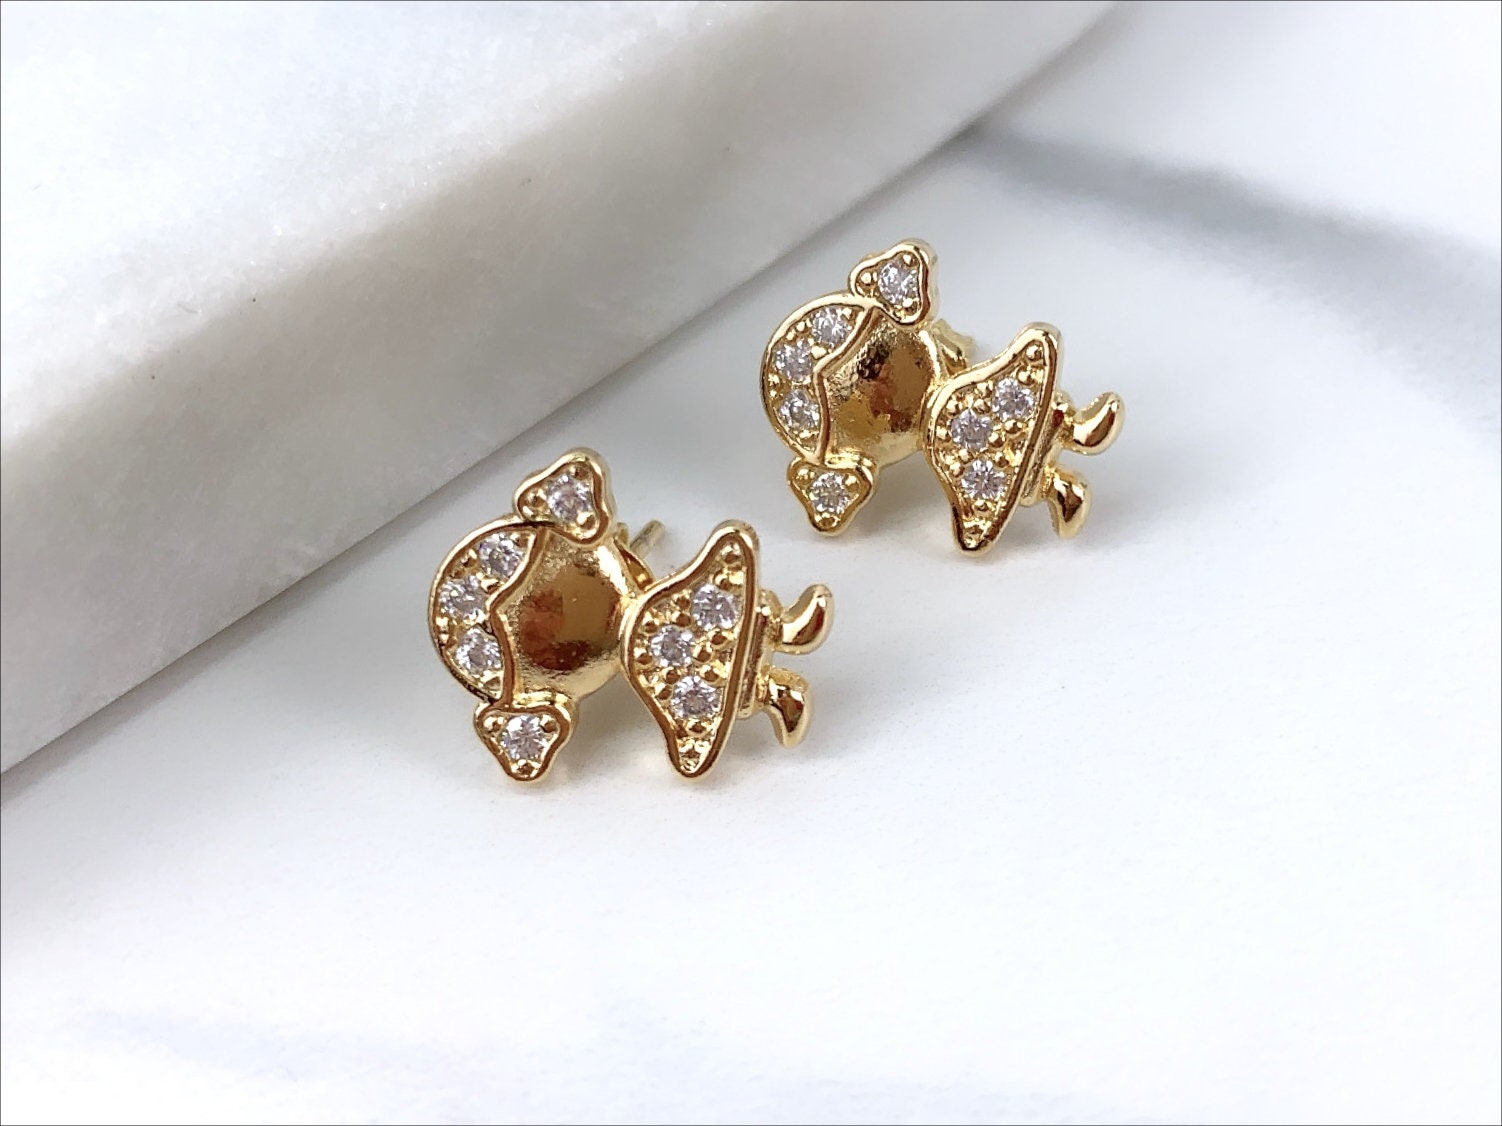 18k Gold Filled Girl Charms & Stud Earrings with Cubic Zirconia Wholesale Jewelry Supplier